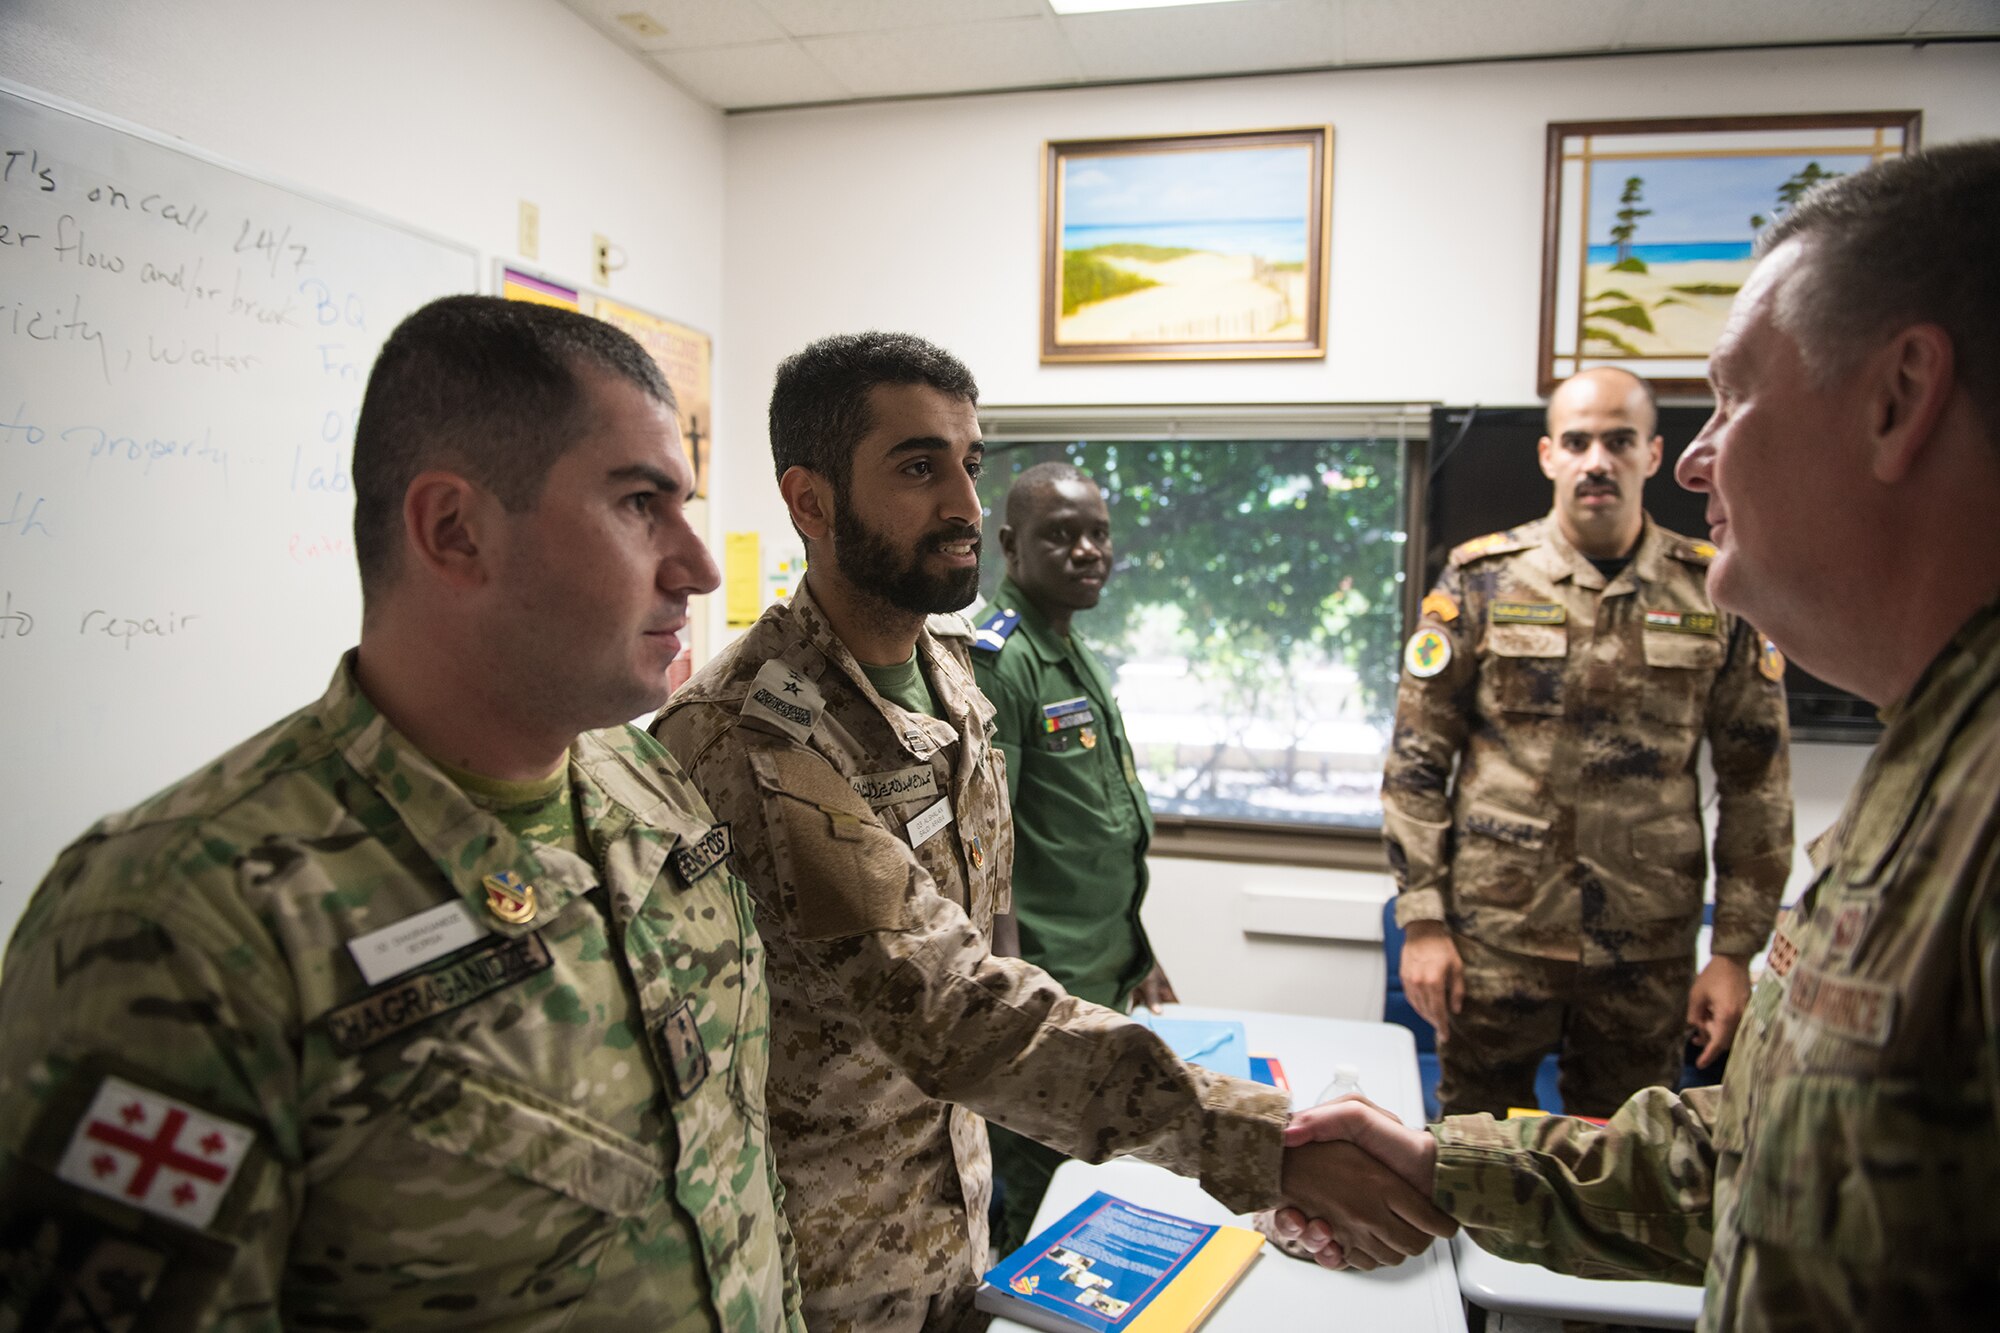 U.S. Air Force Lt. Gen. Brad Webb (right), commander of Air Education and Training Command (AETC), shakes hands with international students during his immersion tour at the 637th Training Group at Defense Language Institute English Language Center Aug. 1, 2019, at Joint Base San Antonio-Lackland, Texas.